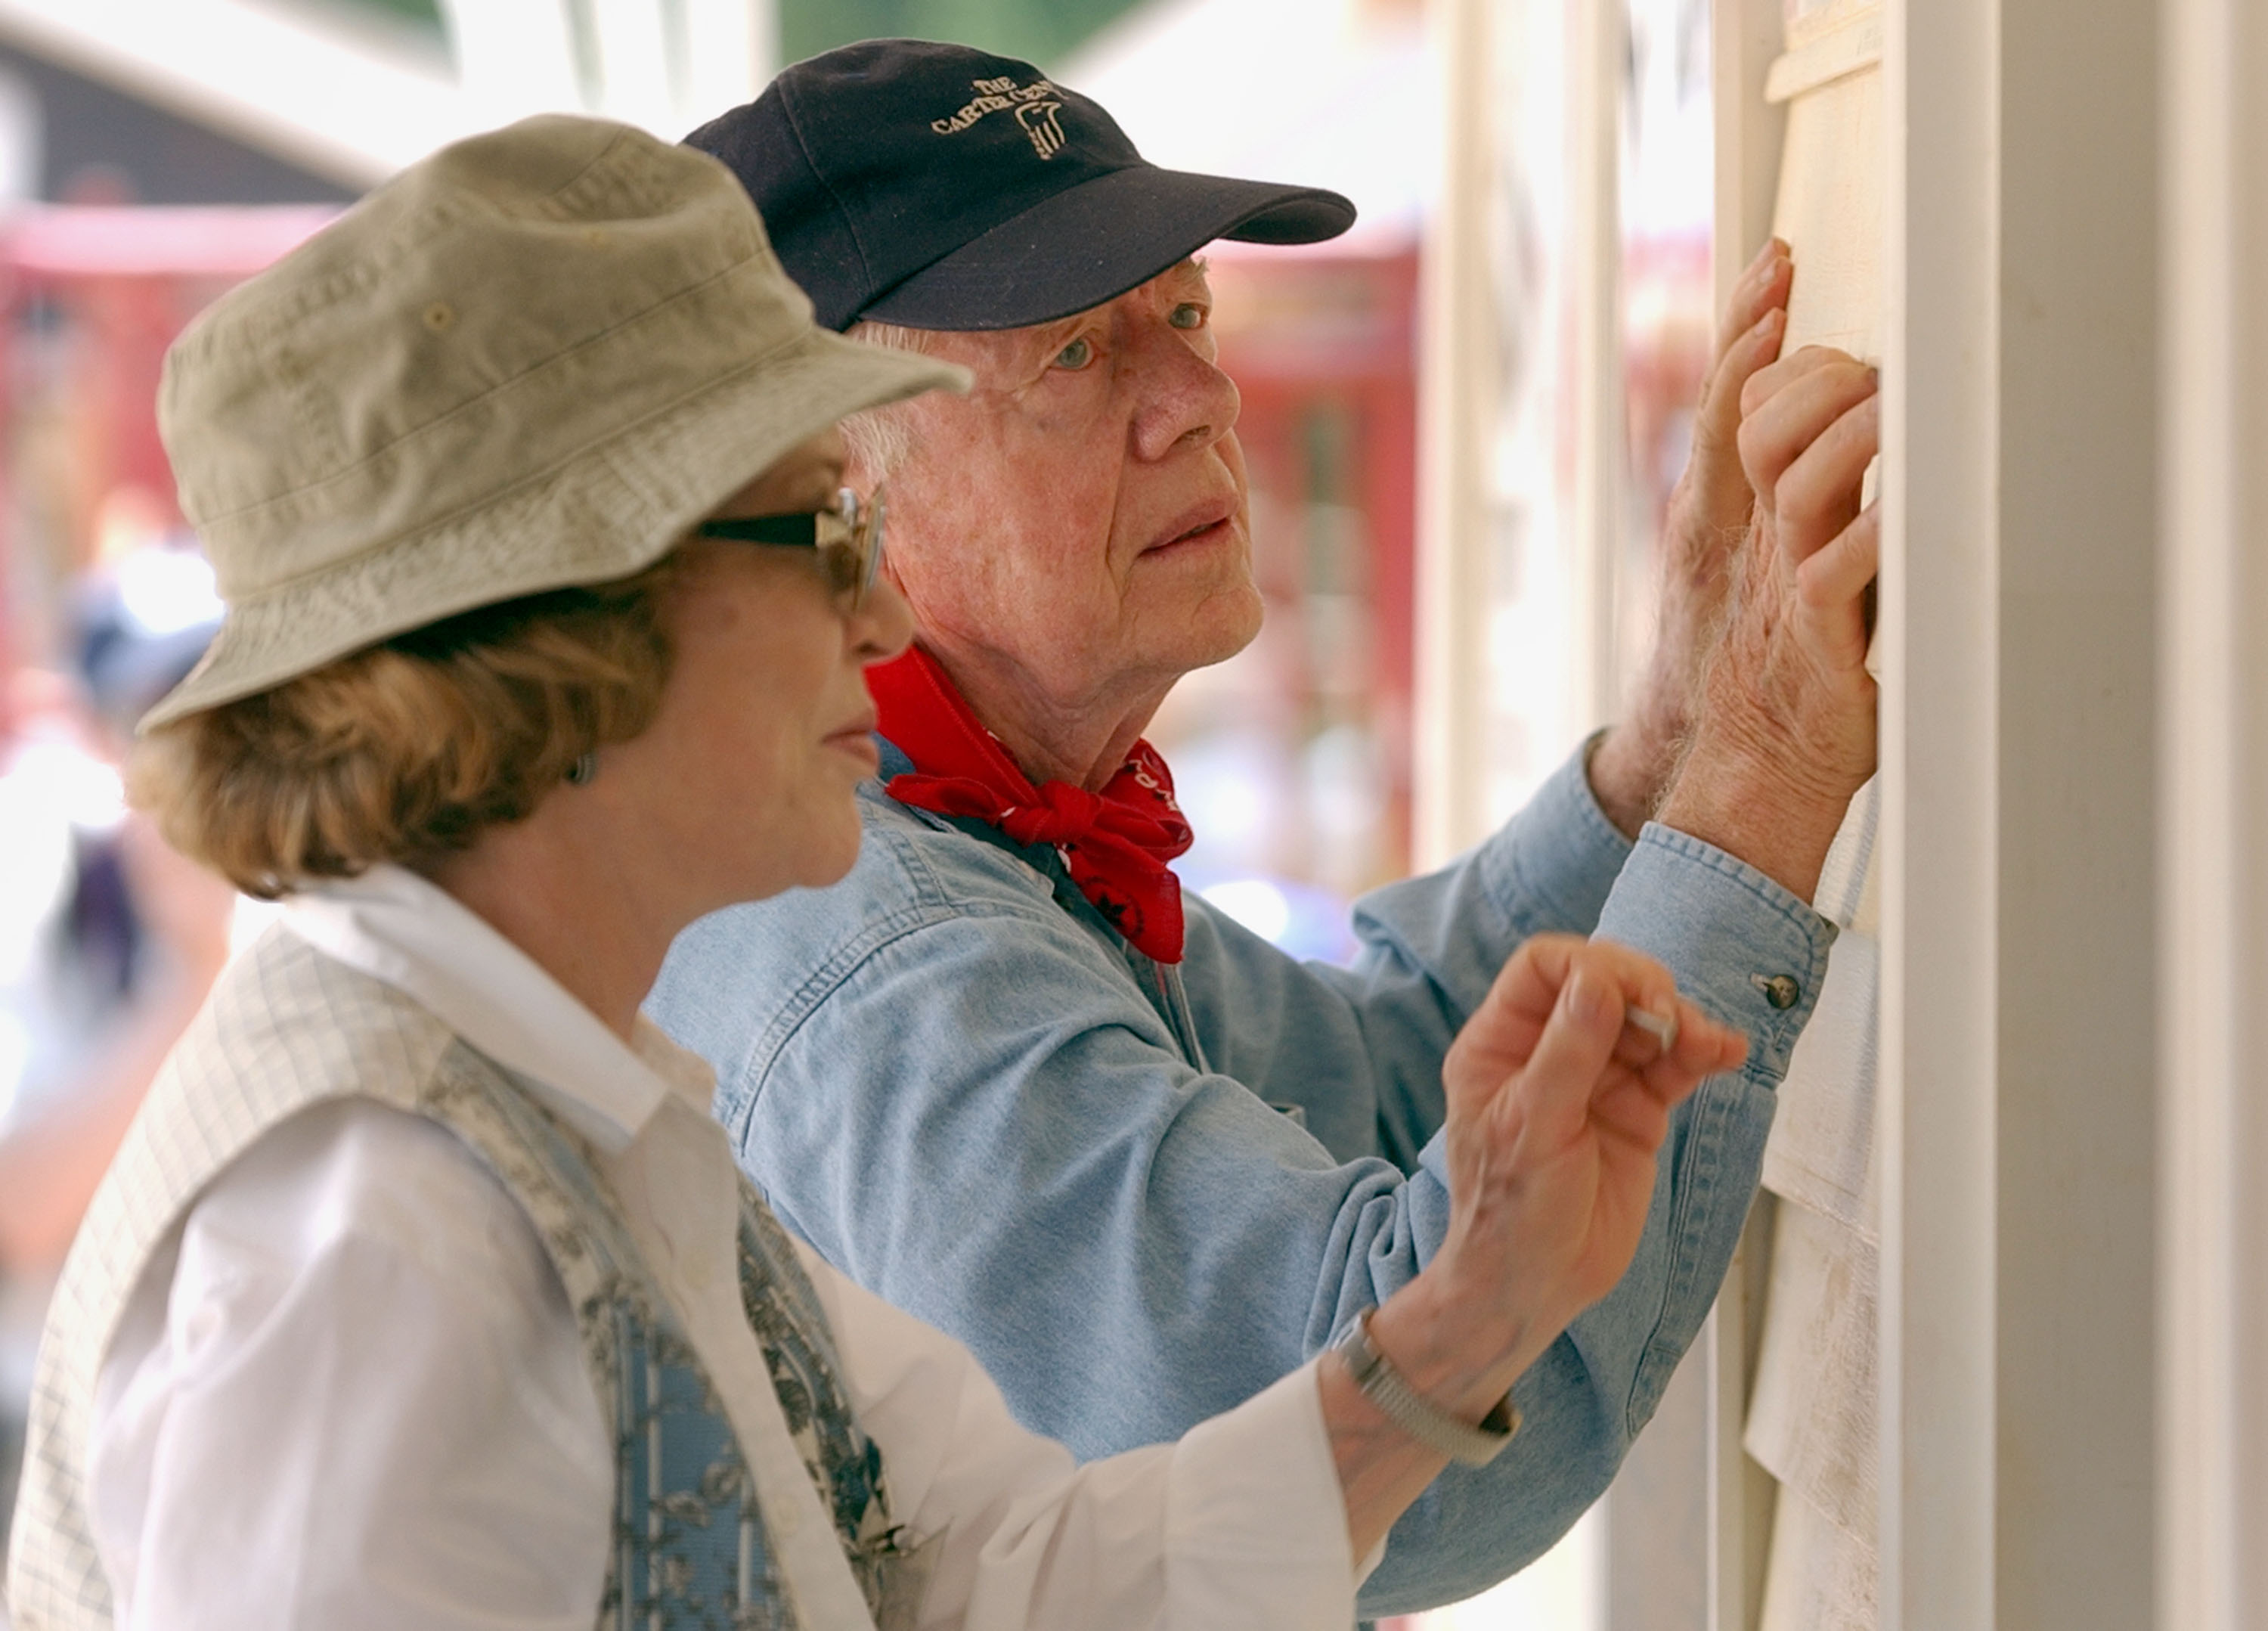 Jimmy and Rosalynn Carter attach siding to the front of a Habitat for Humanity home being built in LaGrange, Georgia, on June 10, 2003. | Source: Getty Images